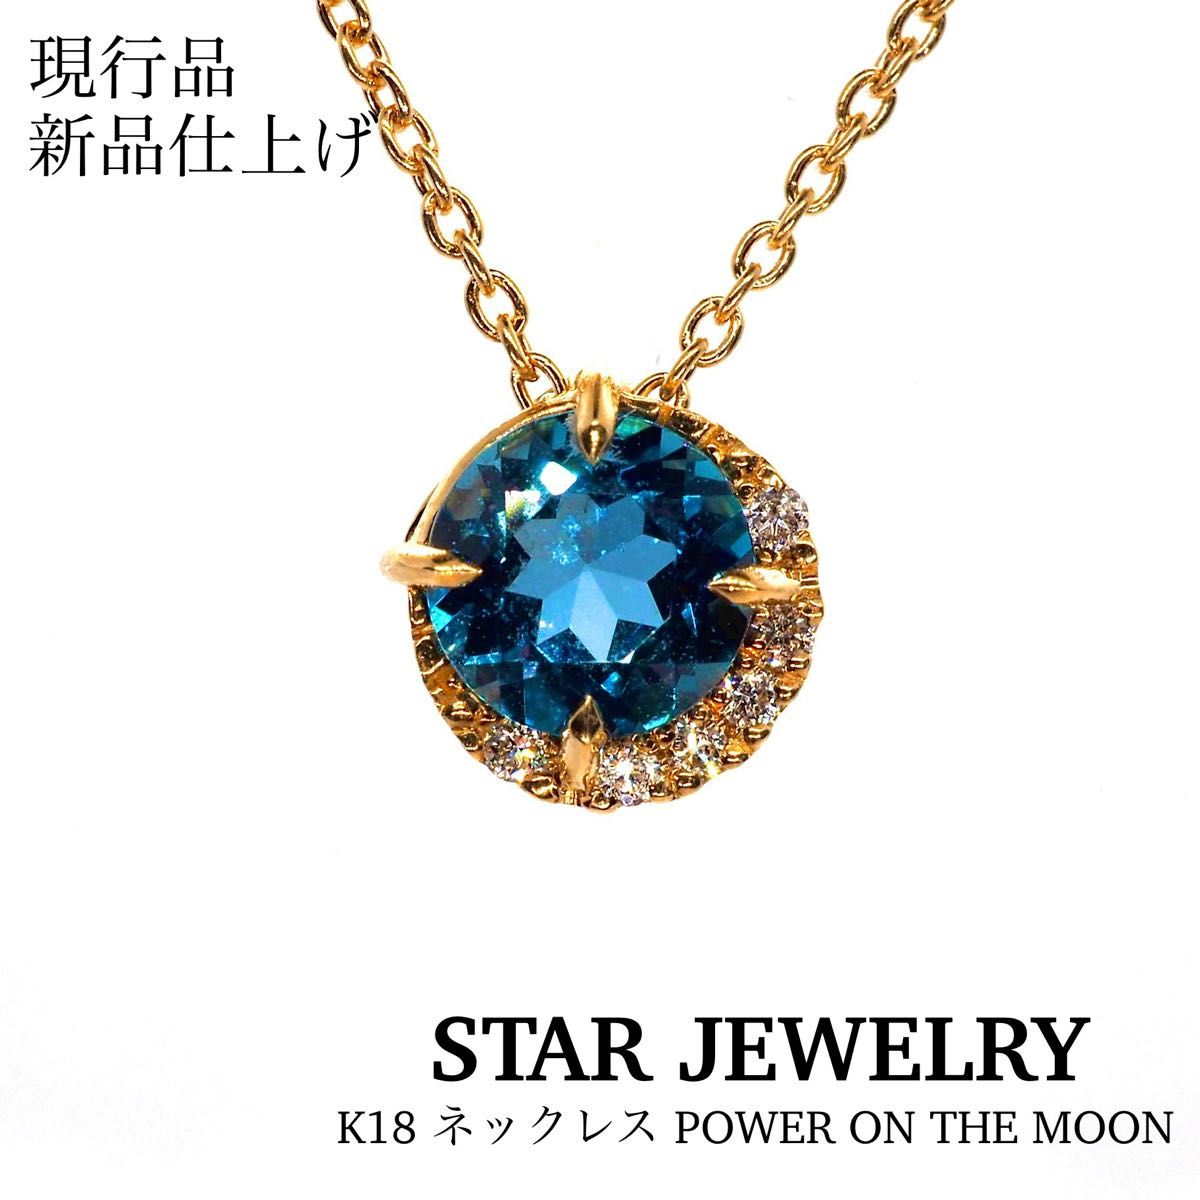 【STAR JEWELRY】K18ネックレス POWER ON THE MOON